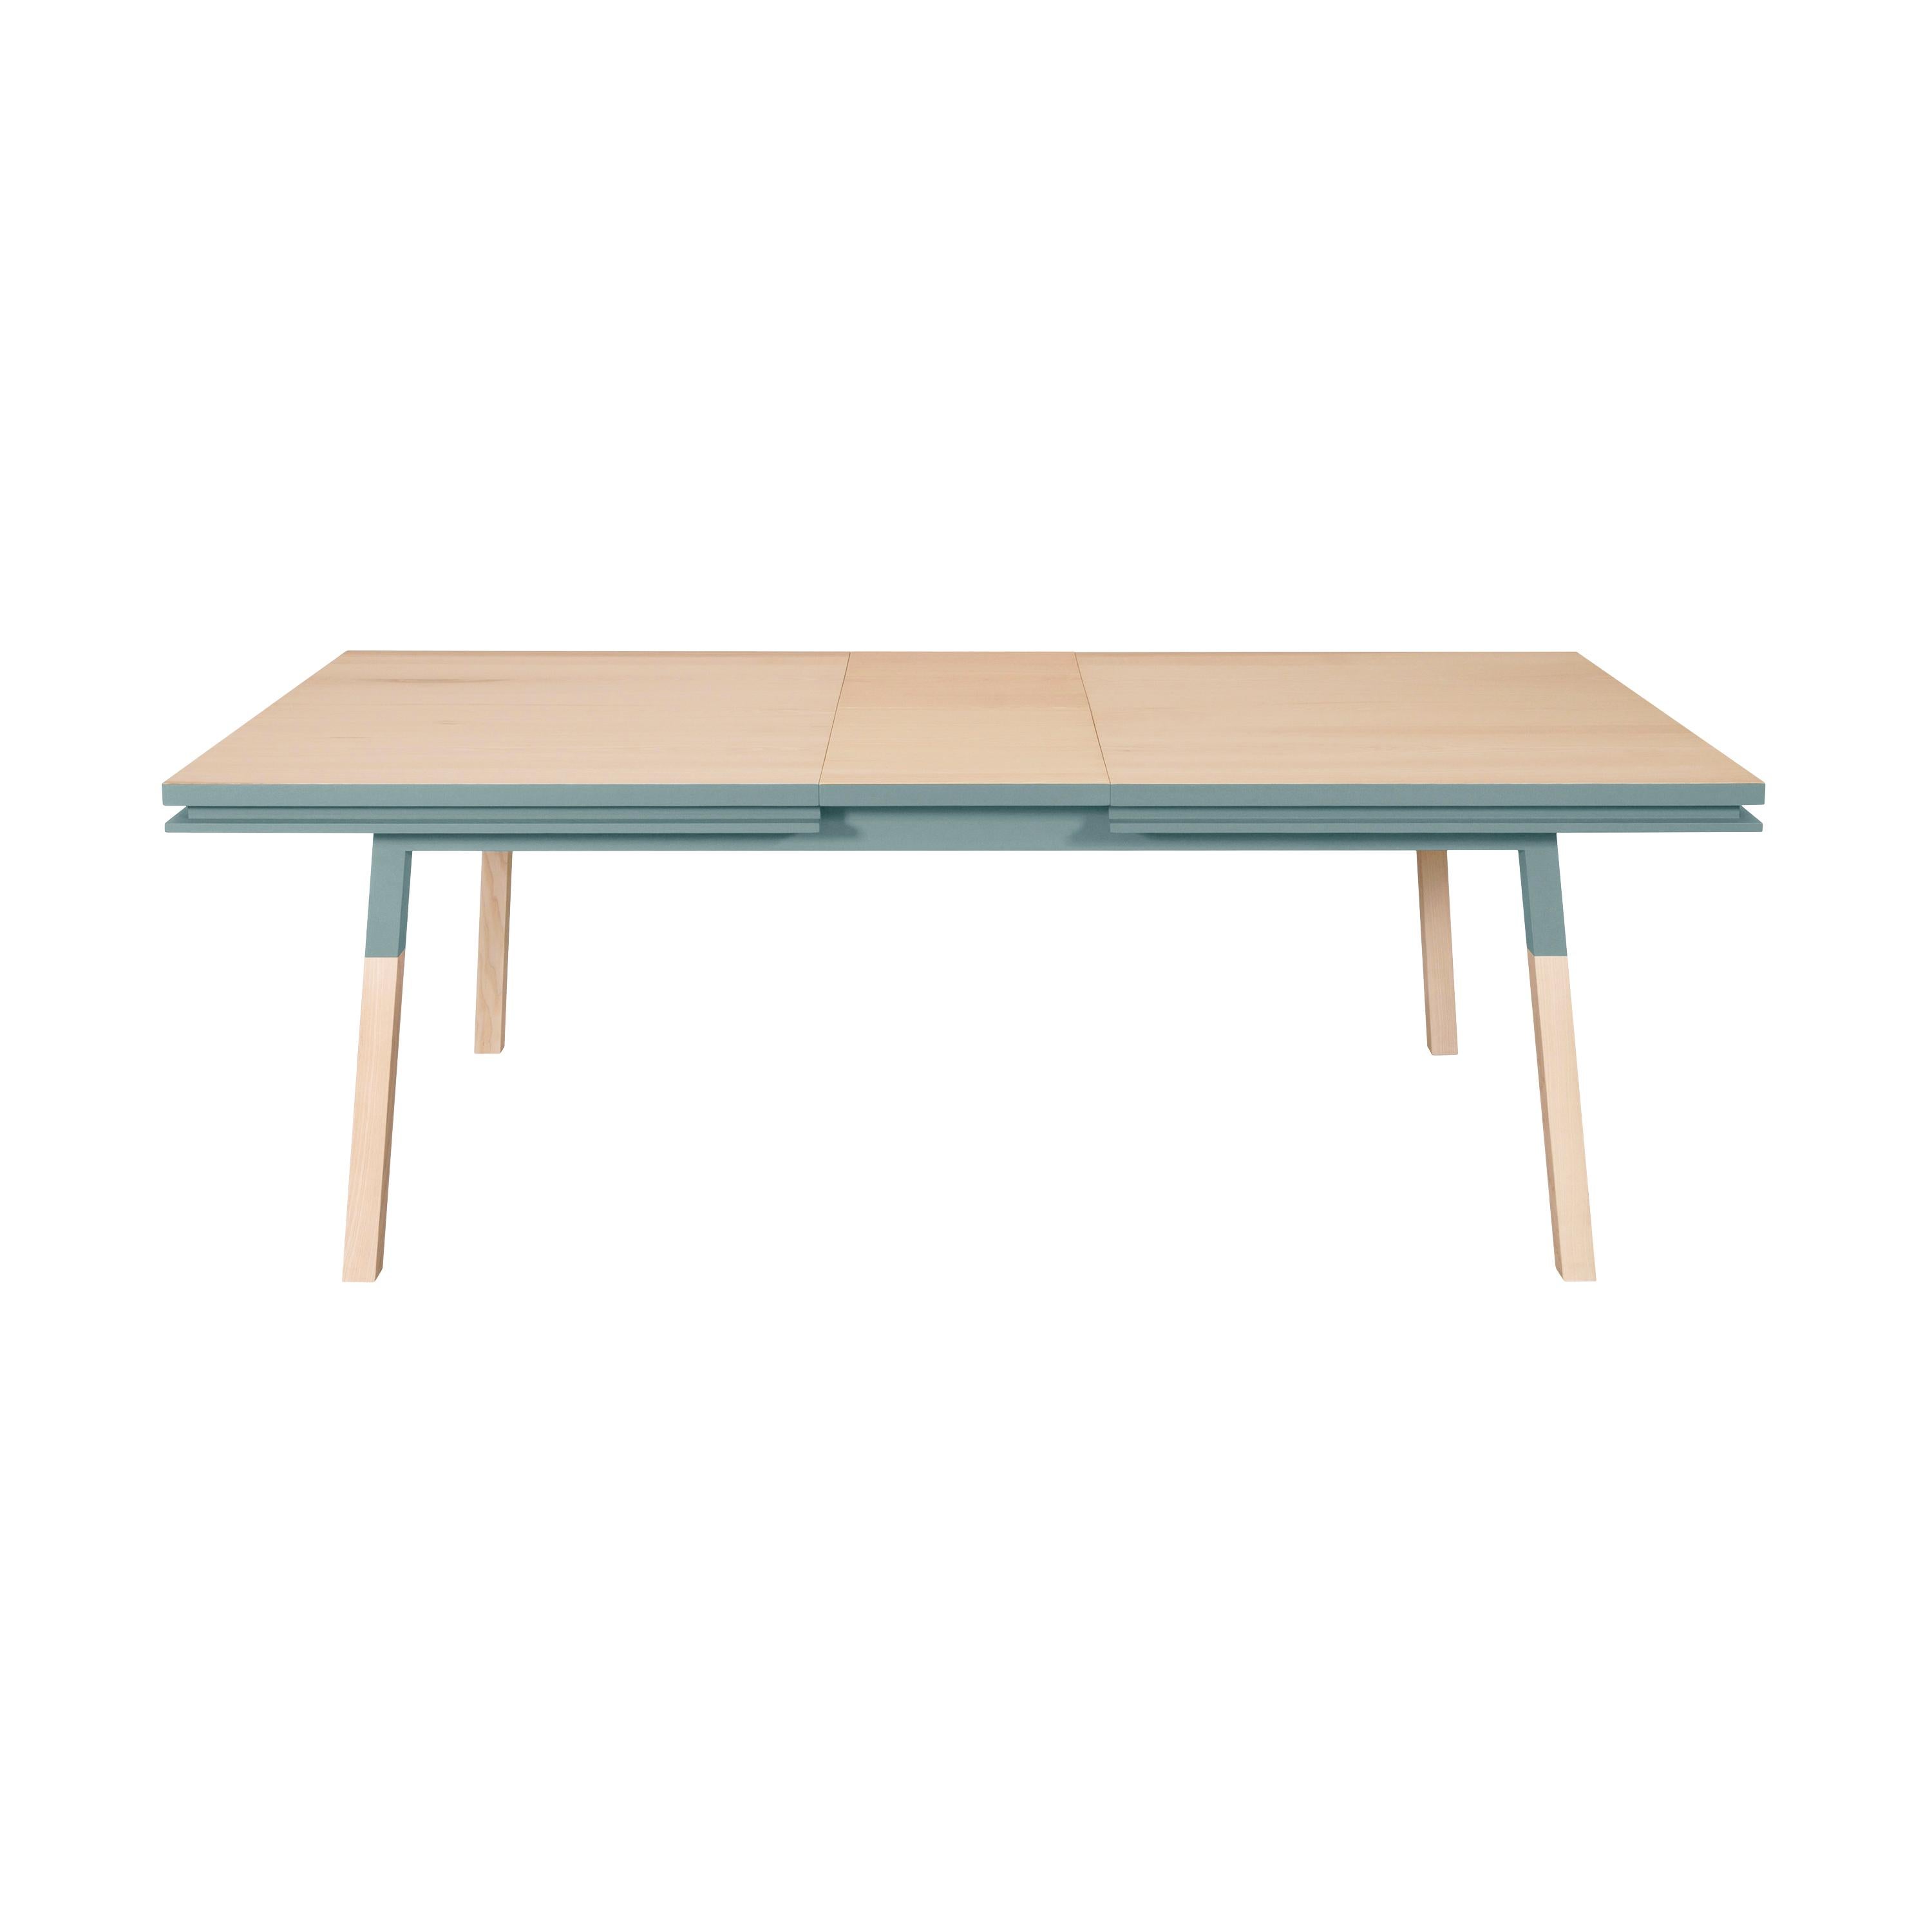 Hand-Crafted Blue gray natural solid wood dining table, designed by E. Gizard in Paris For Sale